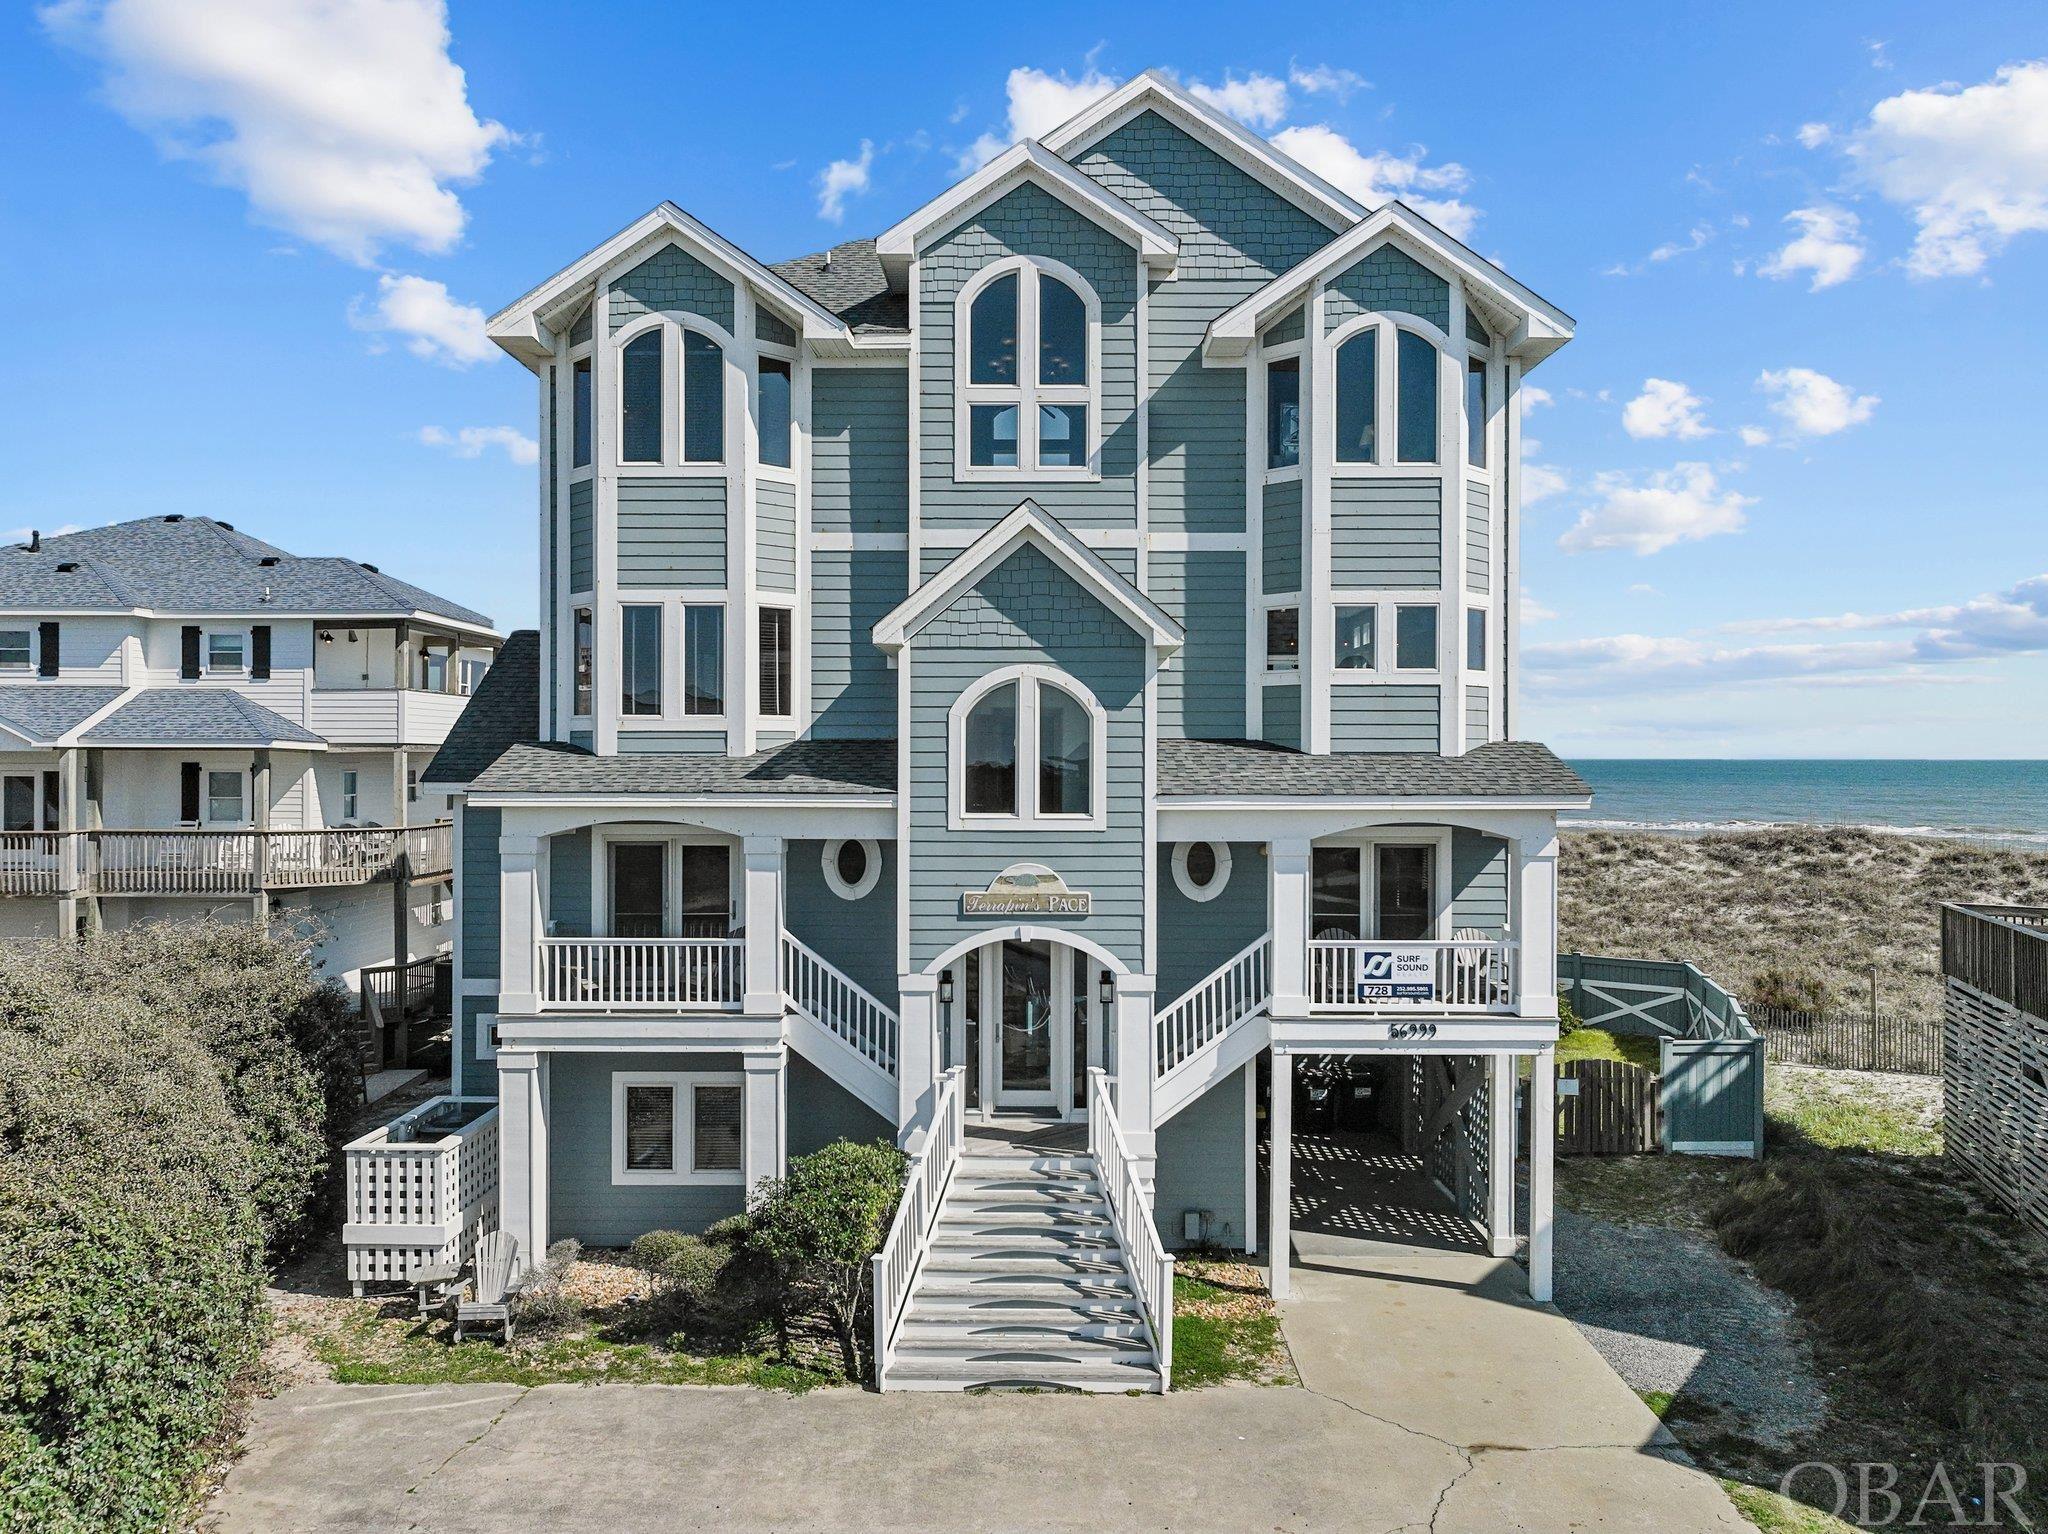 "Terrapin's Pace"; this opulent Oceanfront Home offers a unique 4 story custom design, provides everything guests and vacationers could desire, with stylish finish materials, and some of the most expansive and panoramic ocean views around….all just steps from the beach!  Providing all it does, in this location, this vacation home has always been a fan favorite, generating consistent high rental income, and has another great rental season booked for 2024.  Over $244k owner rental income during 2023, and already over $216k owner income for 2024, with room to grow. At  5,091 sf, (with elevator to all levels) this dramatic property offers tons of space and common areas to spread out and enjoy;  including 8 bedrooms, all primary suites for comfort and privacy & with mounted HDTV’s,  8 full and 2 half baths; multiple common areas include a fun recreation room with pool table, foosball, and kitchenette, a beautiful Oak paneled library / theater room, an expansive great / living / dining area overlooking the ocean, plus an additional den / media room on the 4th level, offering a wet bar & amazing dune, beach, and ocean views!  Outside enjoyment areas include ample decking all along the oceanfront to soak in the views, covered Soundside decking, and a backyard pool area that feels like your own Oceanfront private outdoor resort, with an expansive heated concrete pool,  custom in-ground hot tub, and great Tiki bar for outdoor entertaining.  Comfortable living in the great room with cathedral ceilings, reclaimed heart pine floors, large dining area, all with wide ocean views, and a large gourmet kitchen with custom cabinets, granite counters, and upgraded stainless steel appliances, including double wall ovens, double d/w's, gas range.  Each bedroom has it’s own style, each bath features custom designed tiles, and the luxurious top level King Suite features private oceanfront deck and large upscale custom bath.  At Terrapin’s Pace, you'll experience dramatic and commanding views from all over the home, enjoy all the desired amenities inside and out, just steps from the beautiful beaches of Hatteras Island. Offered fully furnished, equipped, and accessorized with attractive coastal decor. In a great location, close to the fun and conveniences of Hatteras Village, home to the fishing fleet, headboats, restaurants, shops, and easy access to the 4x4 beaches and Ocracroke Ferry.   Make a point to view additional pictures and 3D Virtual Floorplan Tour at: https://listings.lighthousevisuals.com/sites/yqkrvqk/unbranded